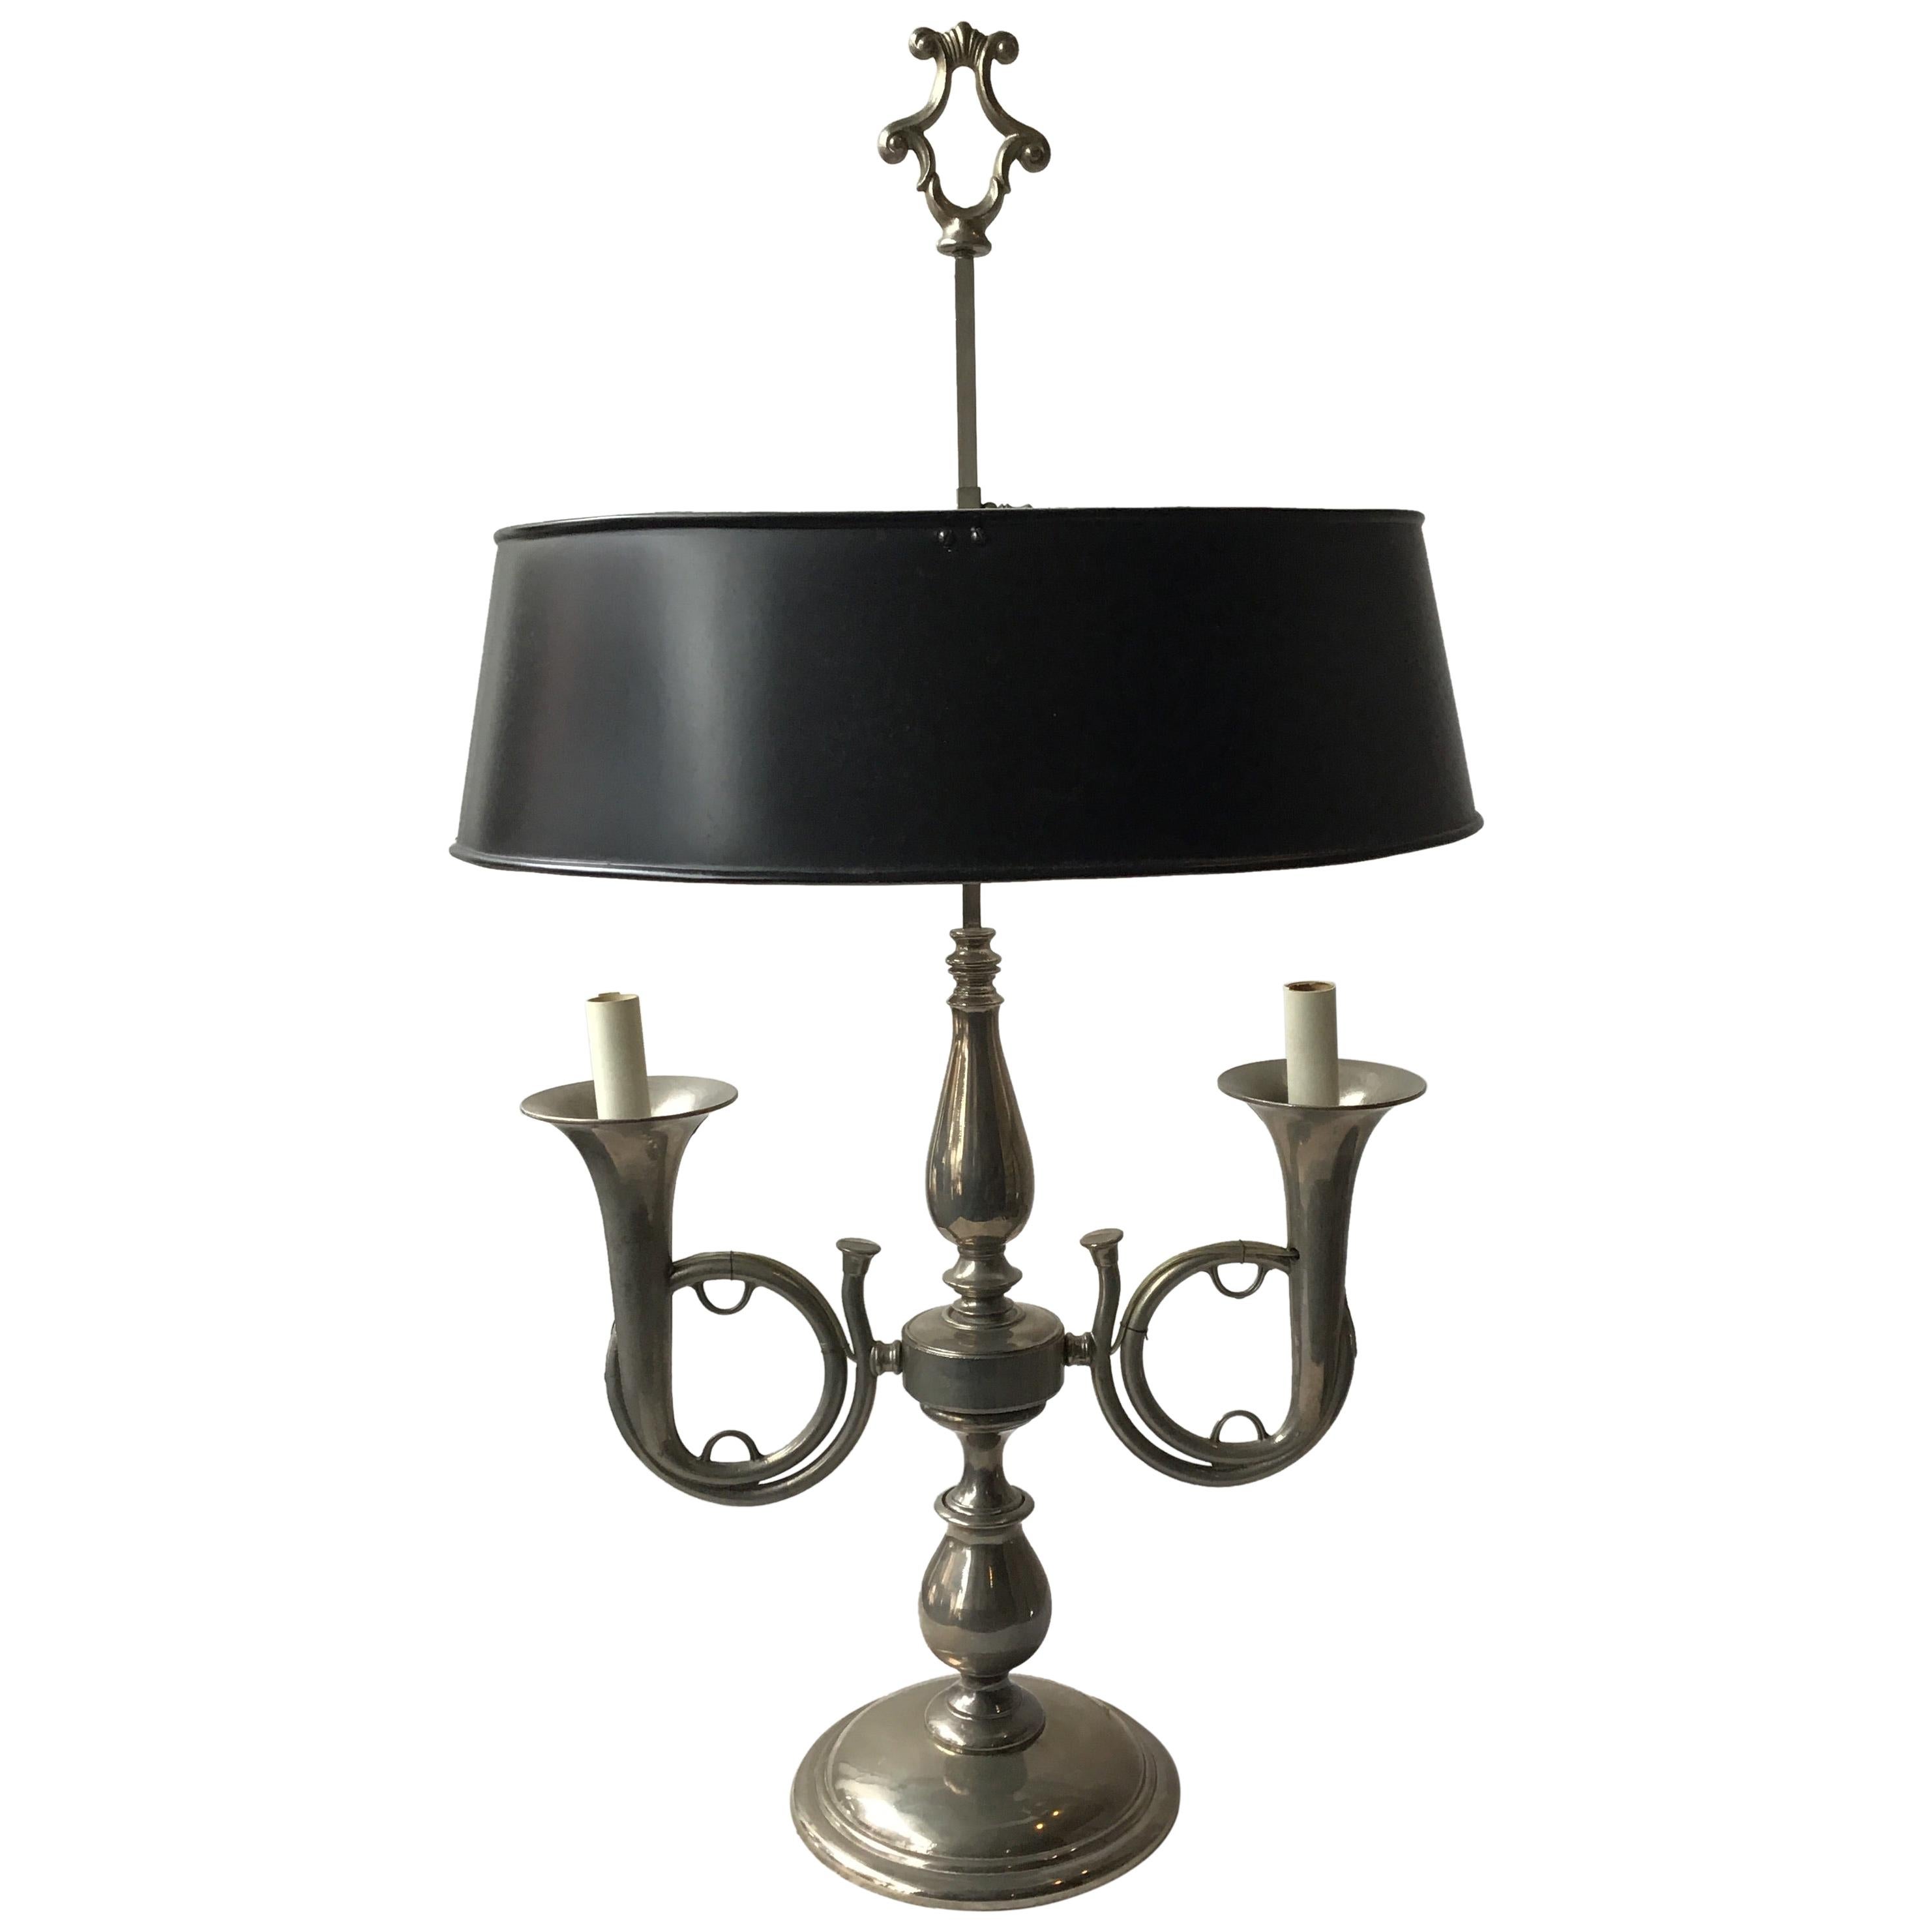 1970s Pewter Trumpet Lamp With Adjustable Tole Shade